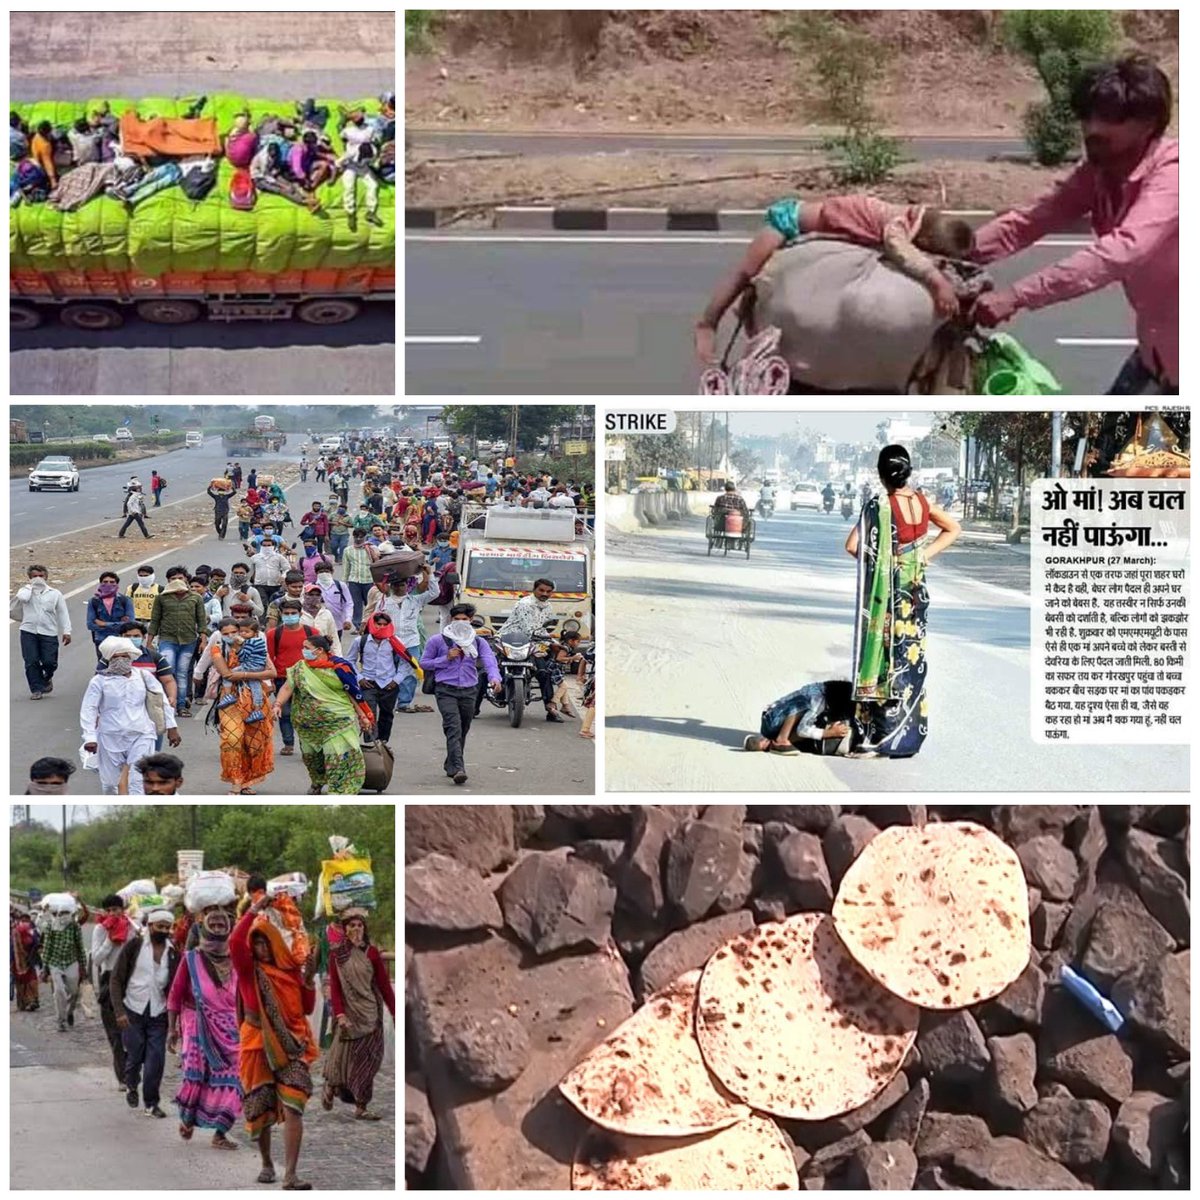 In BJP ruled state of Gujarat Migrant laborers were disinfected like objects, 

Modi government used the opportunity & collected money in the name of PM Cares funds and said will fight COVID in 21 days. 

People proved their stupidity in the name of #DiaJalao & #ThaliBajao